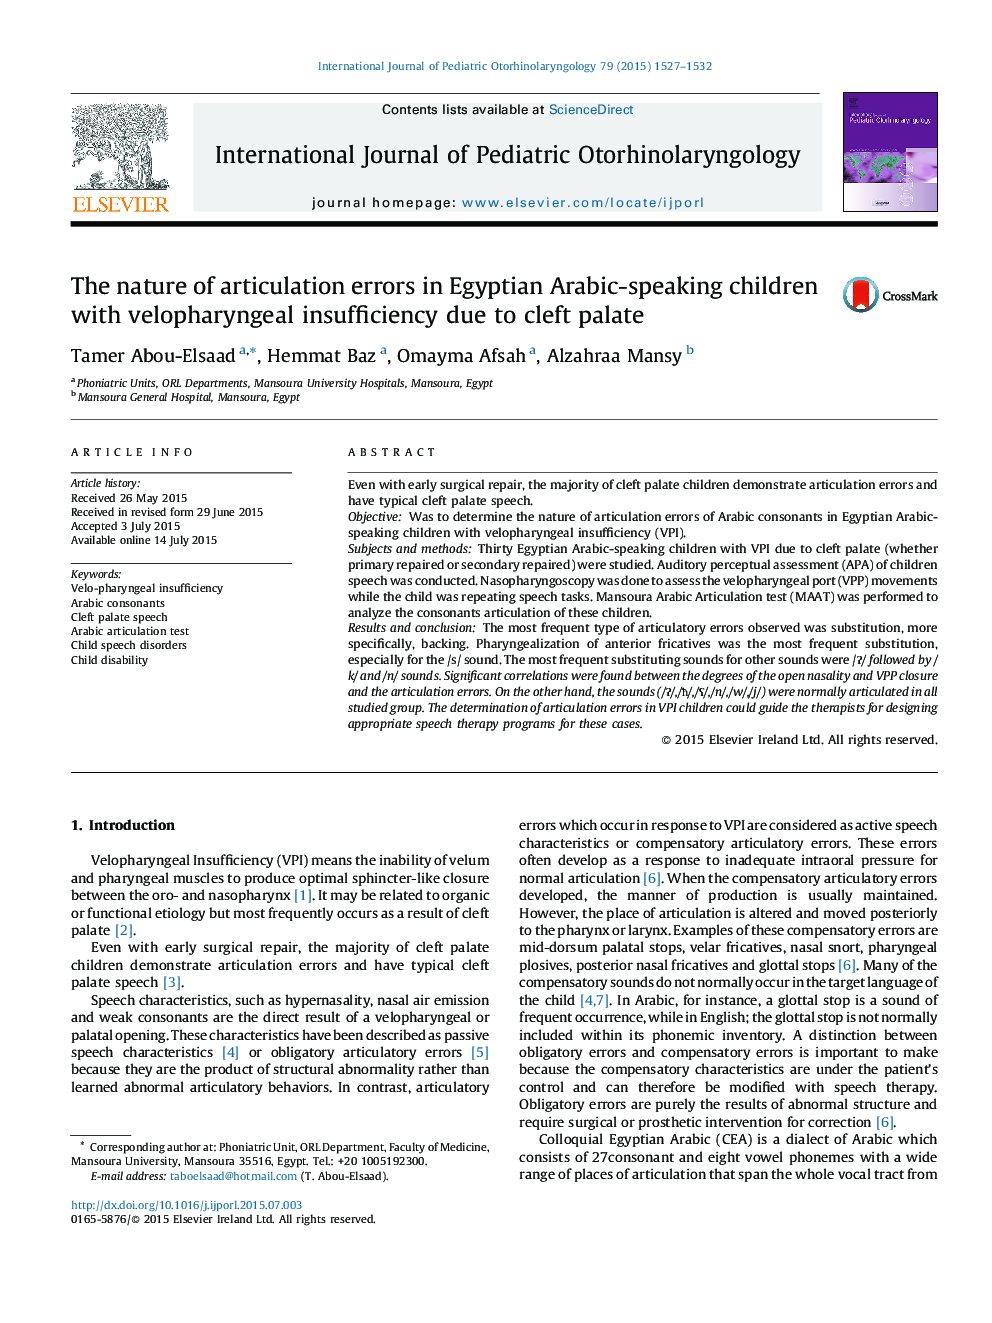 The nature of articulation errors in Egyptian Arabic-speaking children with velopharyngeal insufficiency due to cleft palate